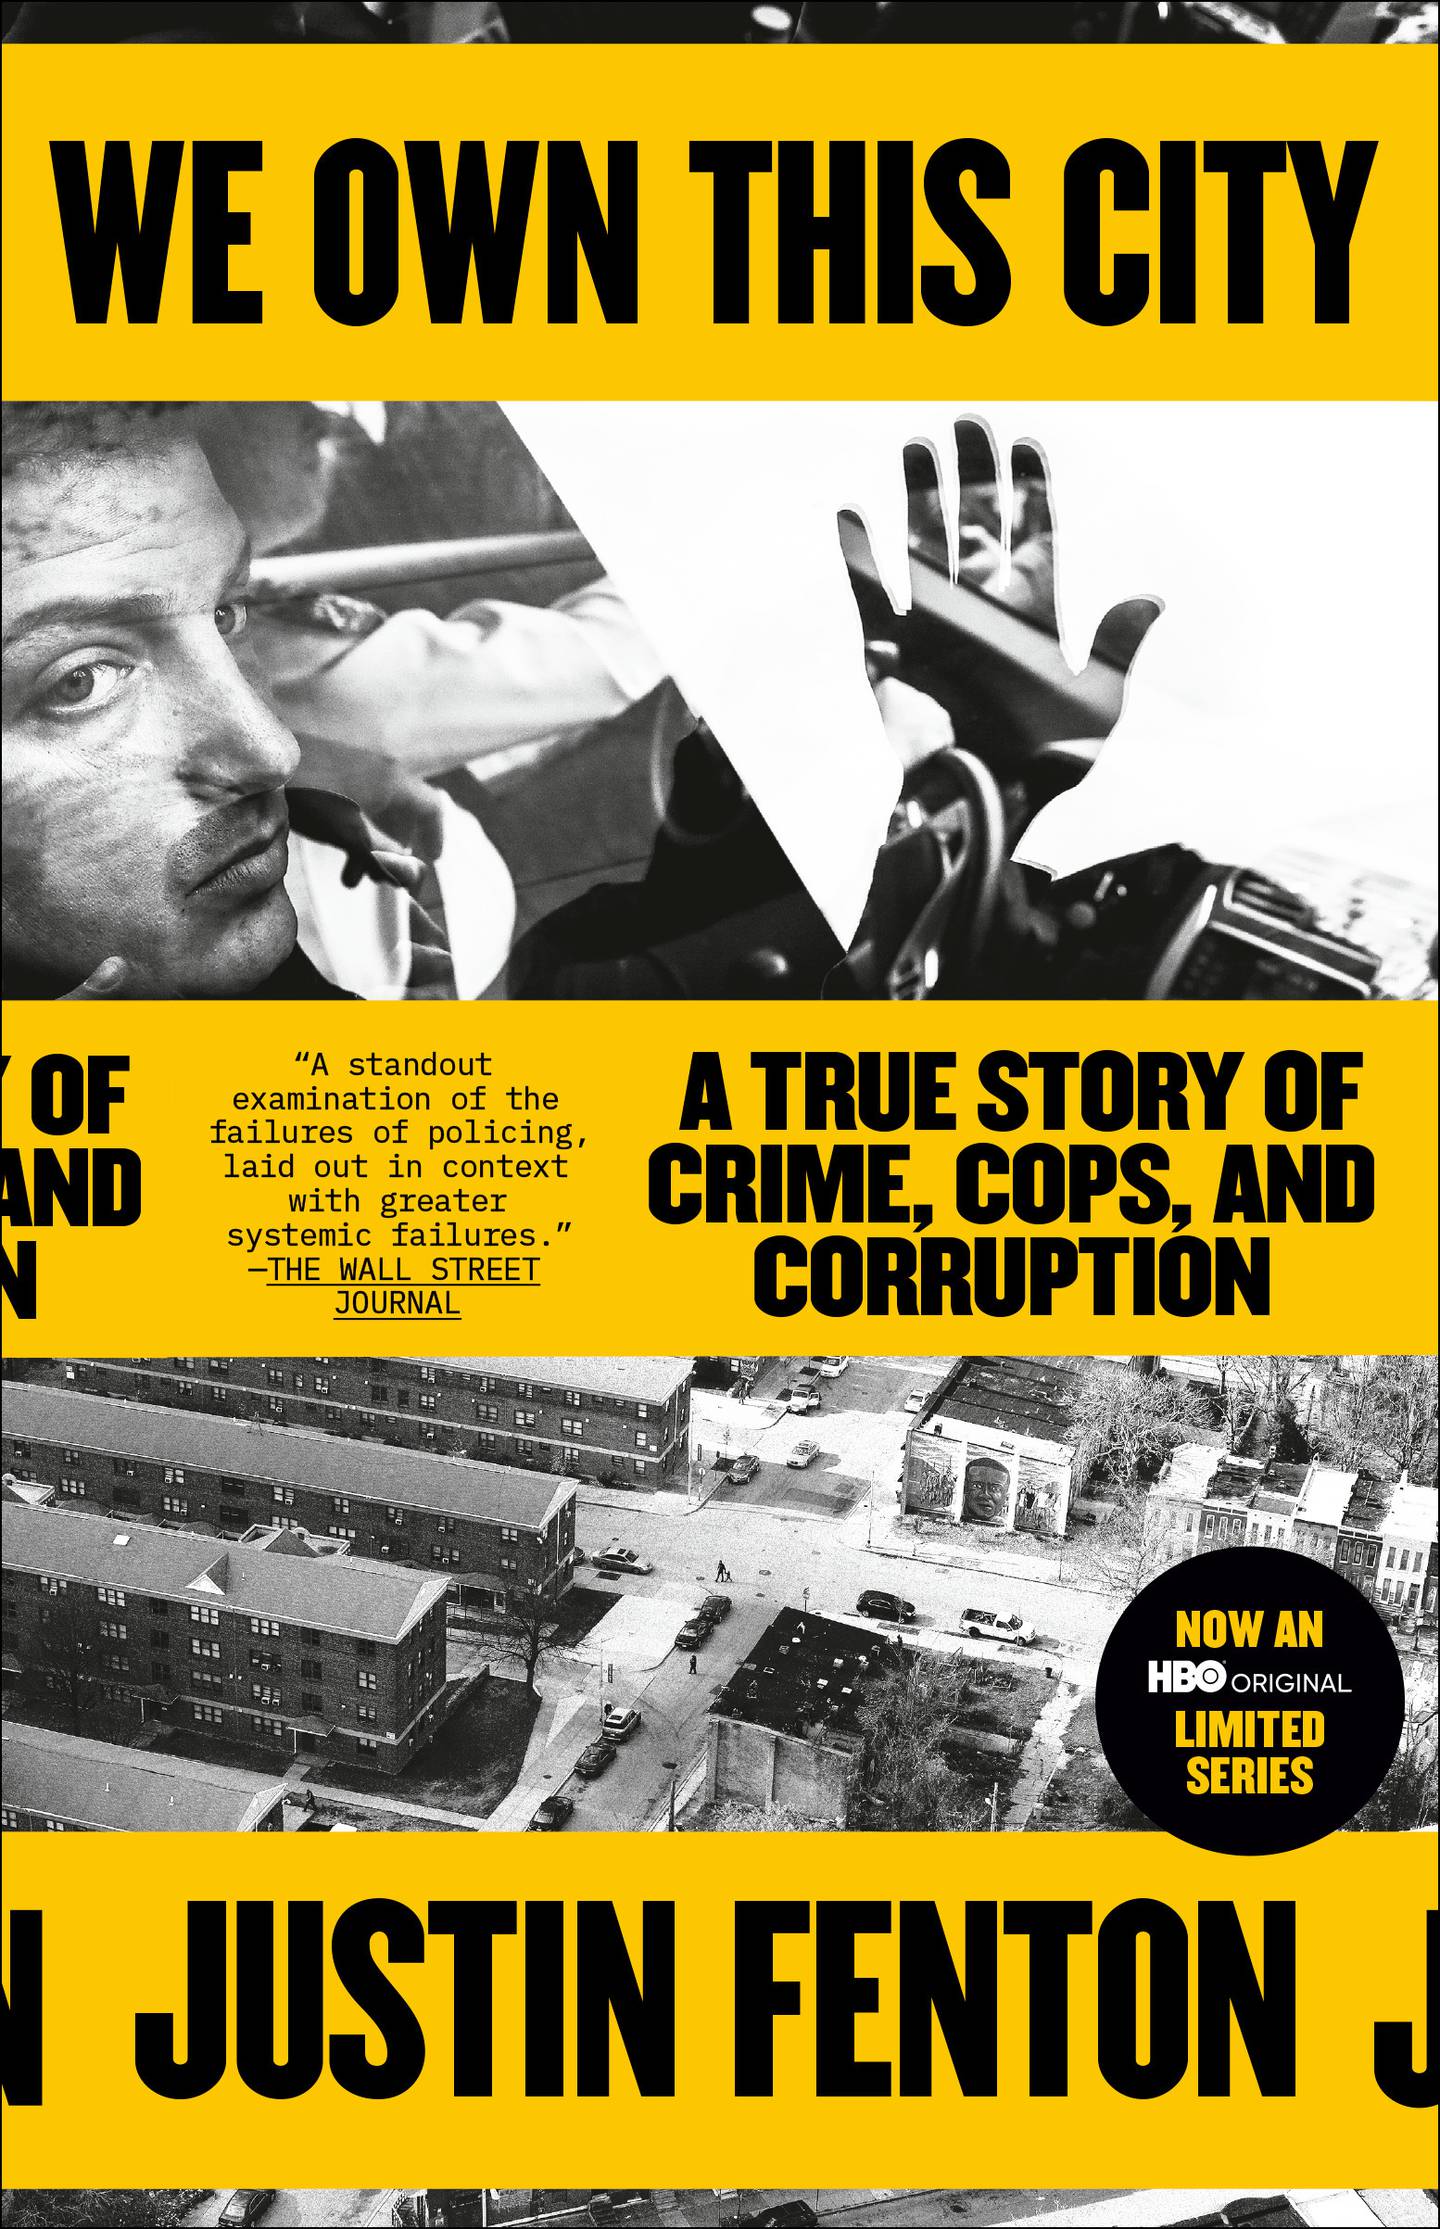 The cover of the book "We Own This City: A True Story of Crime, Cops, and Corruption
Book," by Justin Fenton